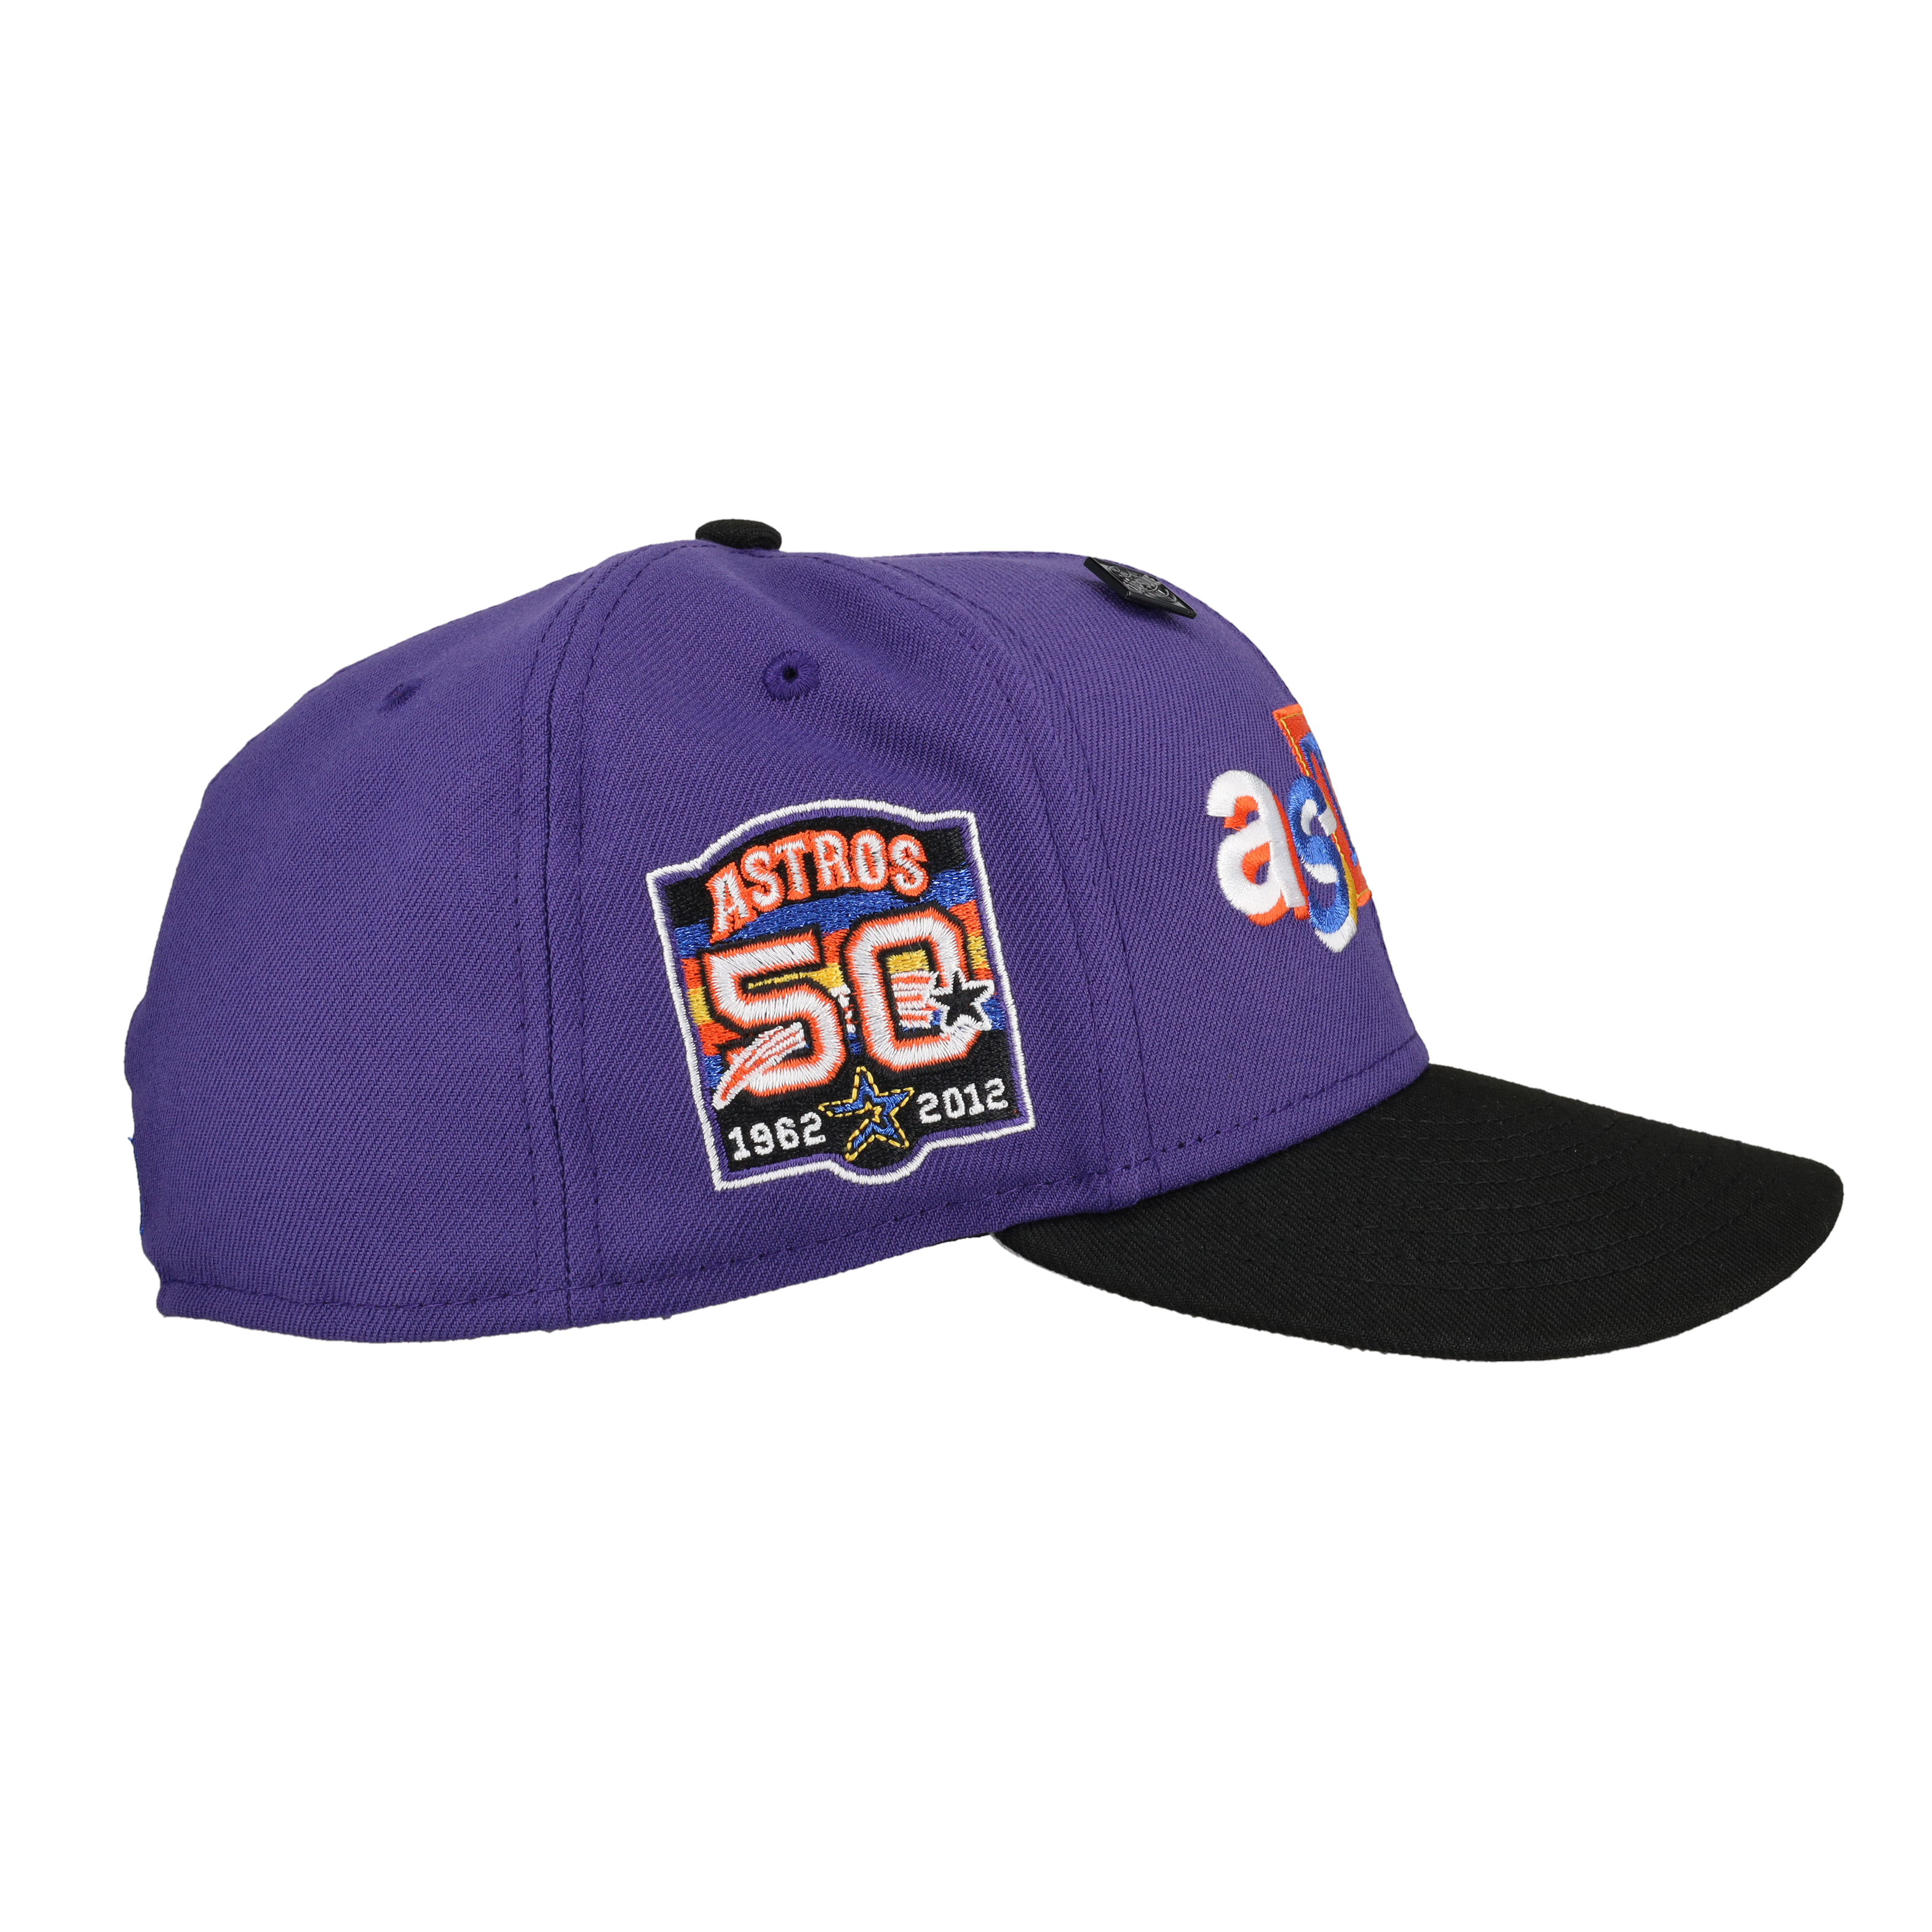 Houston Astros Ransom 50th Anniversary 59Fifty Fitted Hat